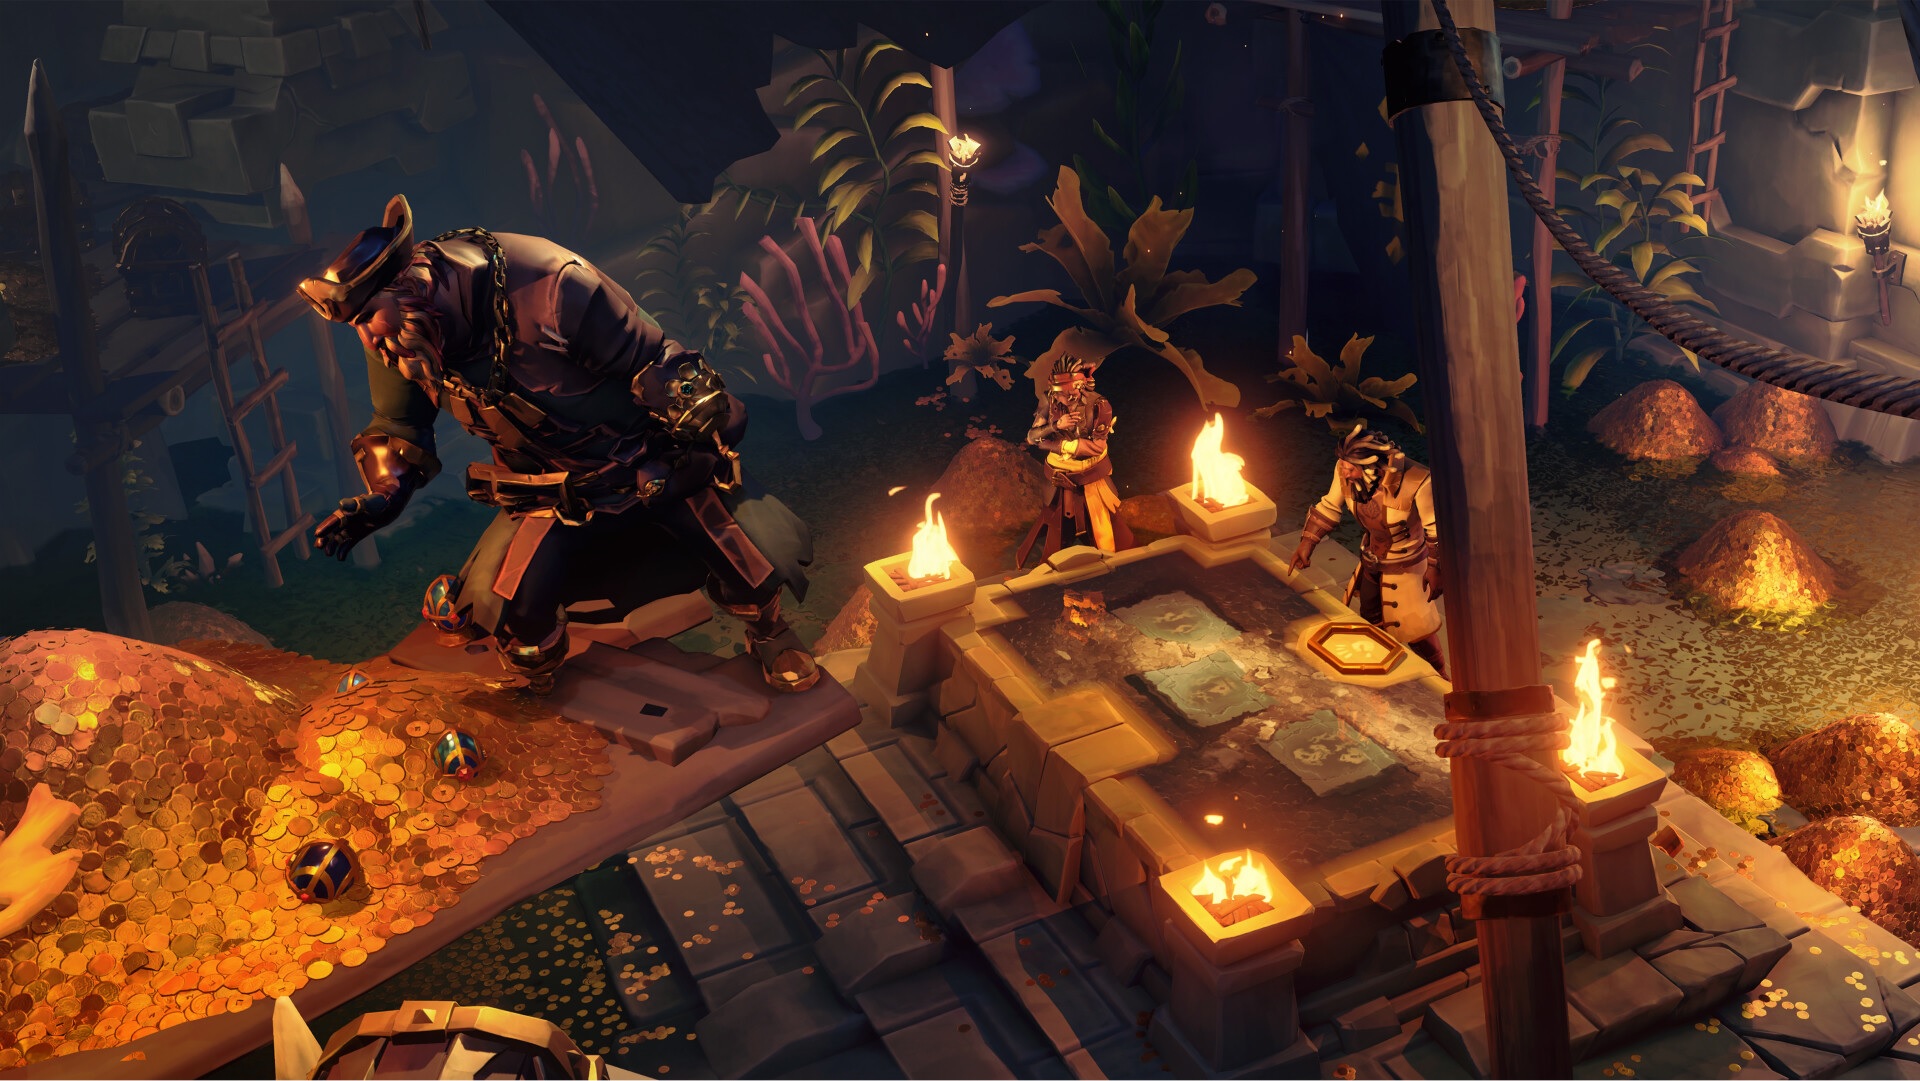 Rare's Sea of Thieves hits 40 million players across Xbox and Windows PC